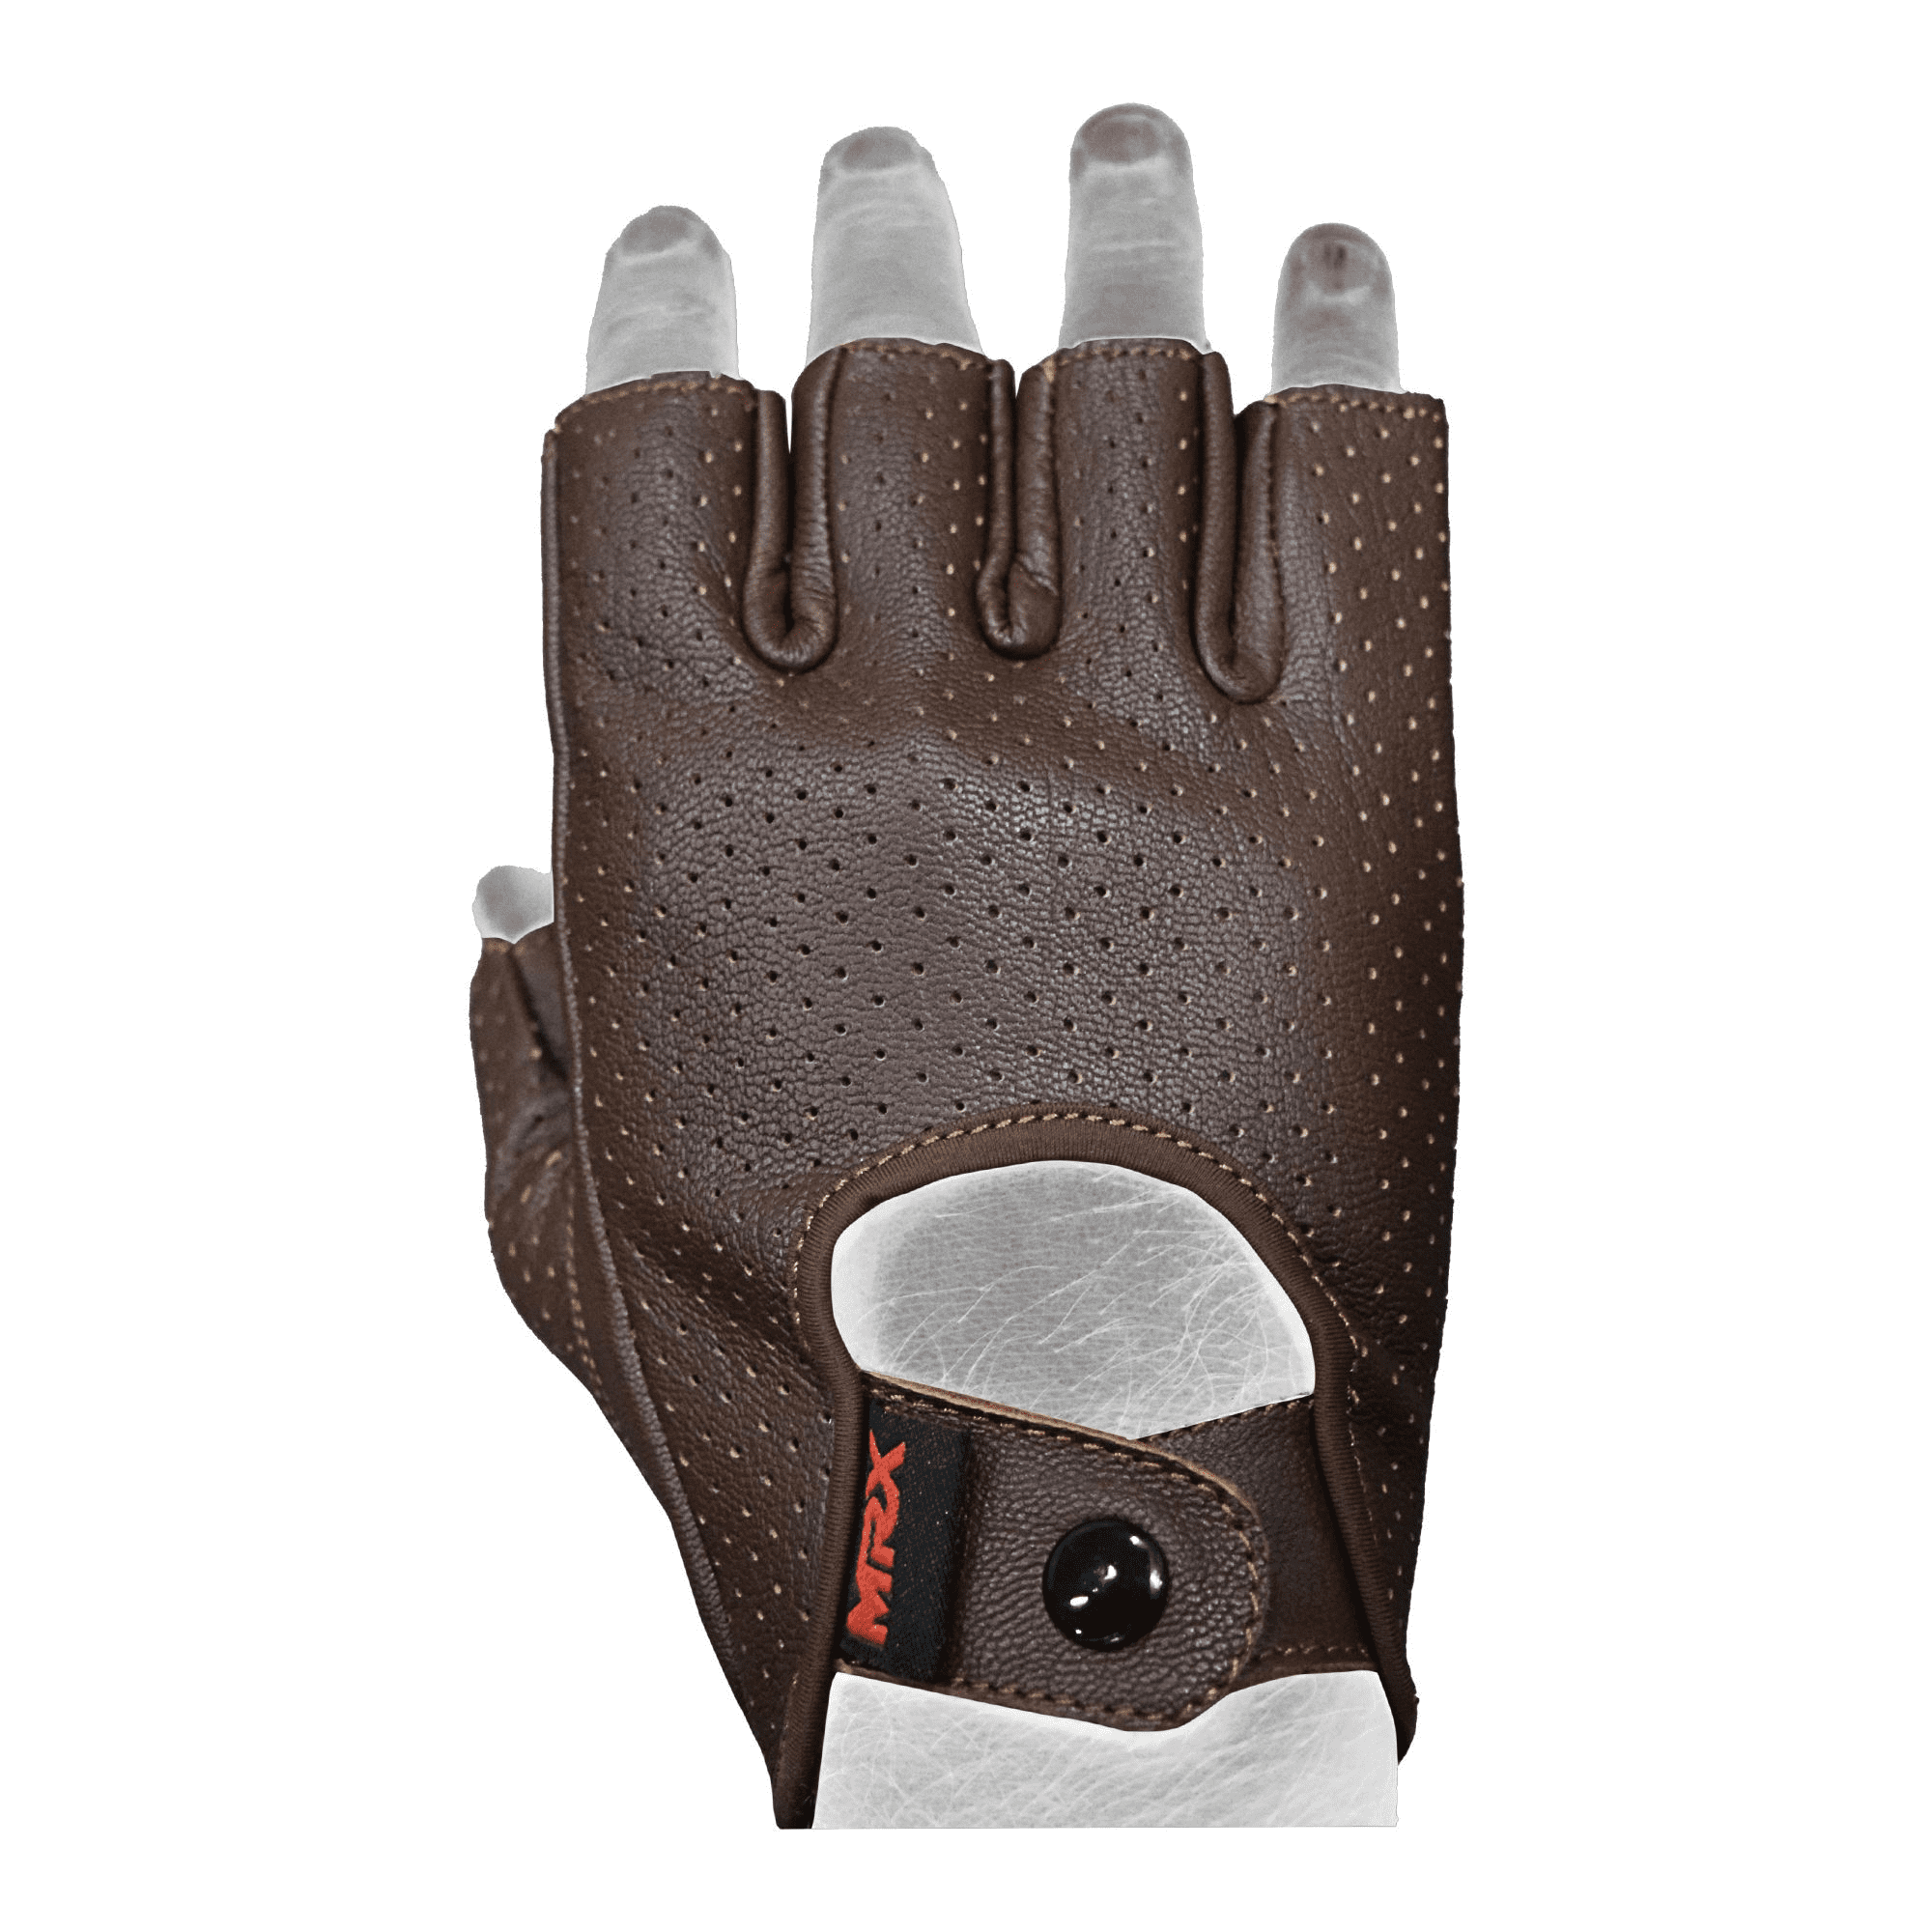 Mens Driving Gloves Basic Soft Goat Leather Fingerless Breathable Biker  Motorcycle Riding Cycling Shooting Glove Half Finger, Brown (Small) 